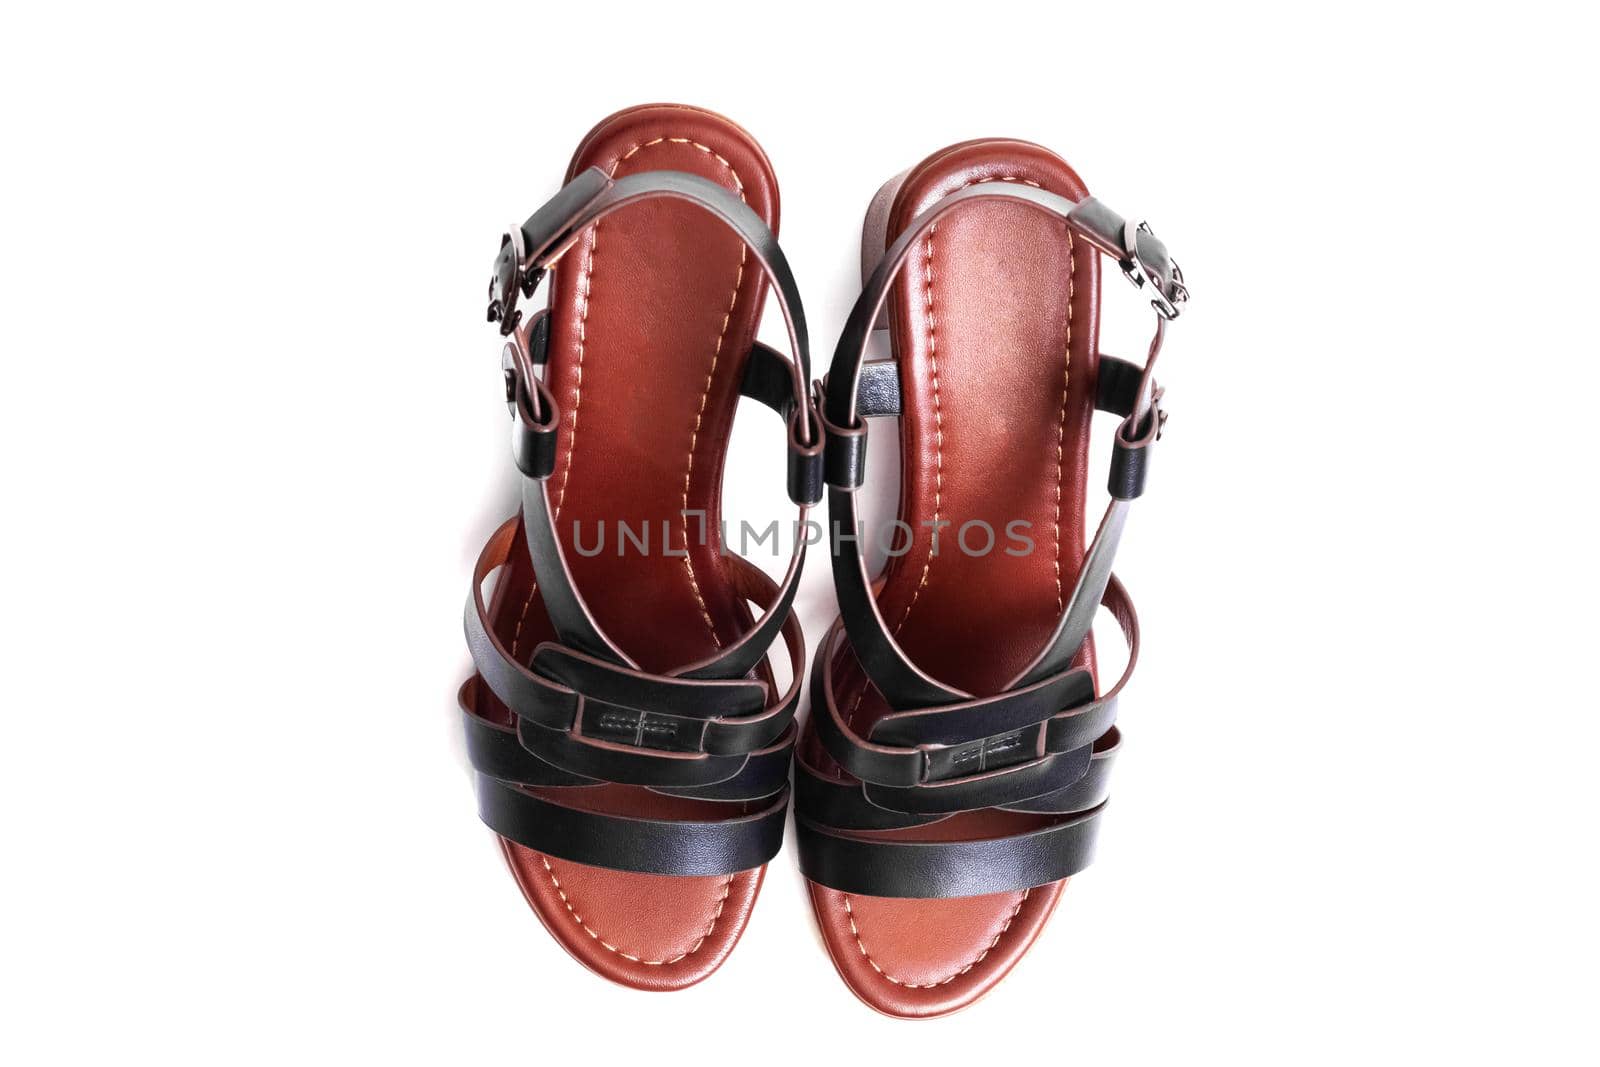 Women's black sandals with straps isolated on a white background close up